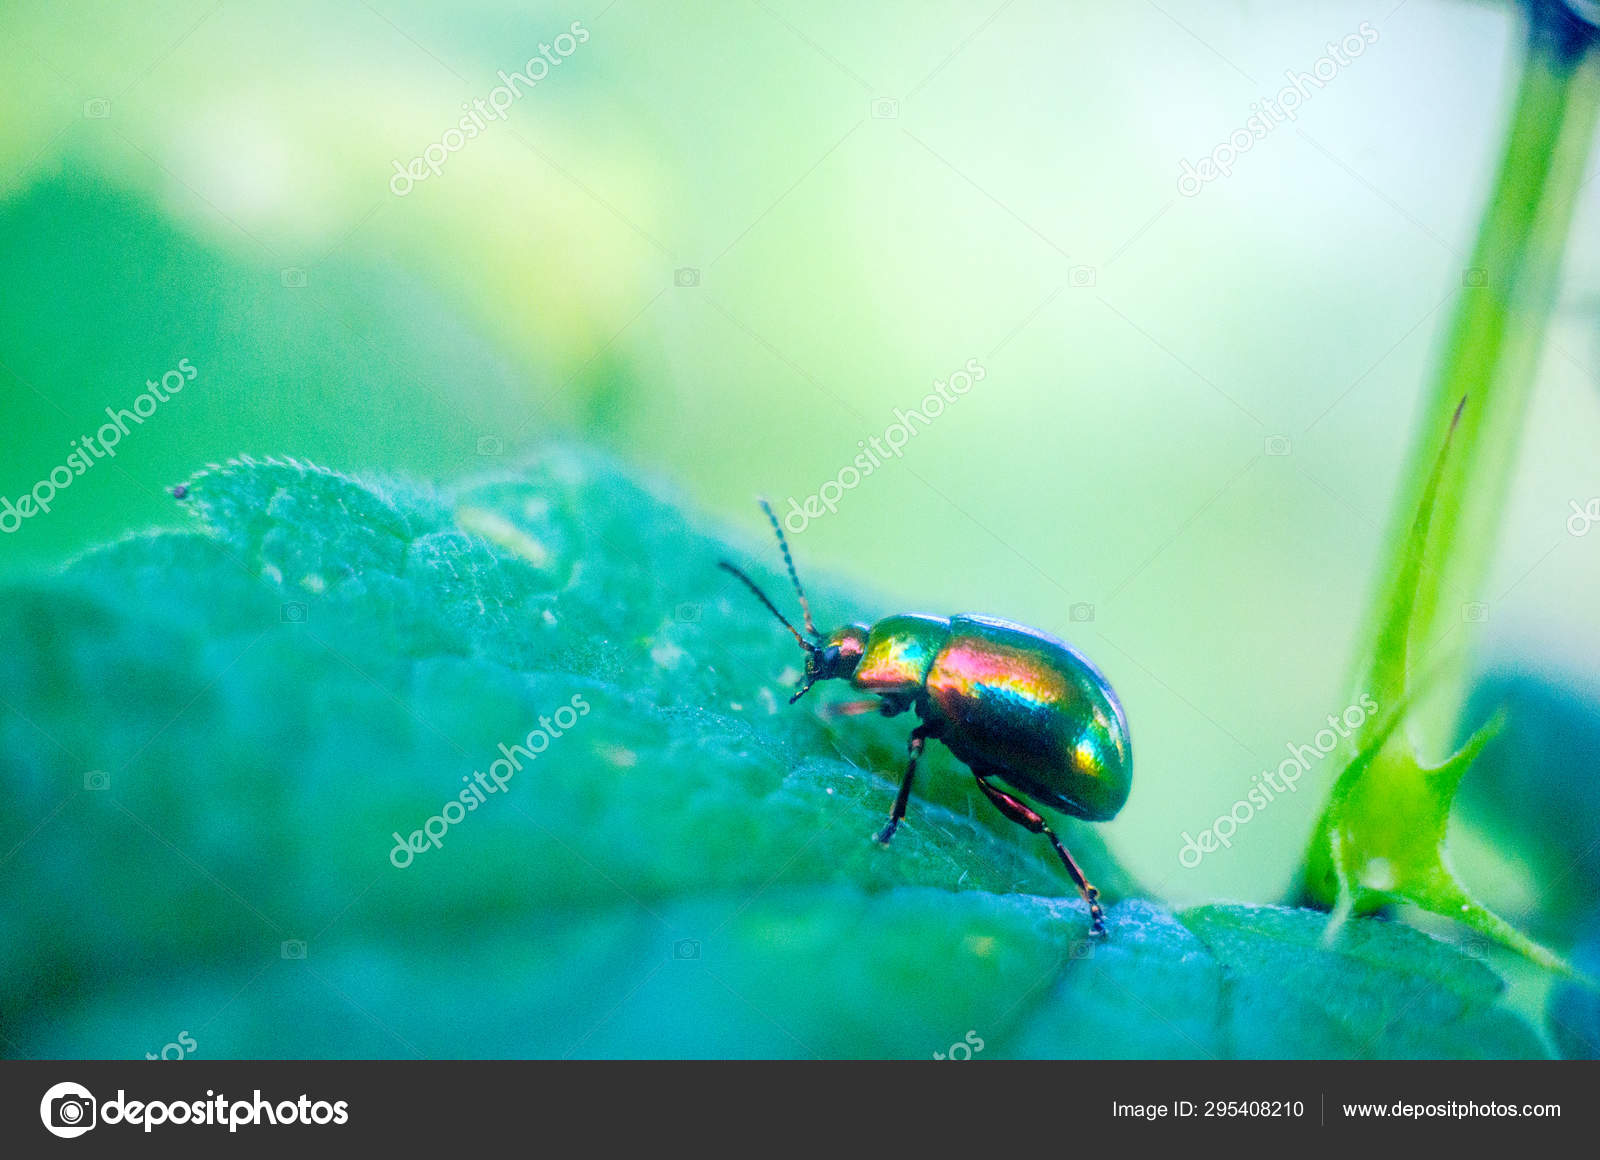 Firefly Beetle Nature Wallpaper Insects Firefly Stock - Flower Beetles , HD Wallpaper & Backgrounds